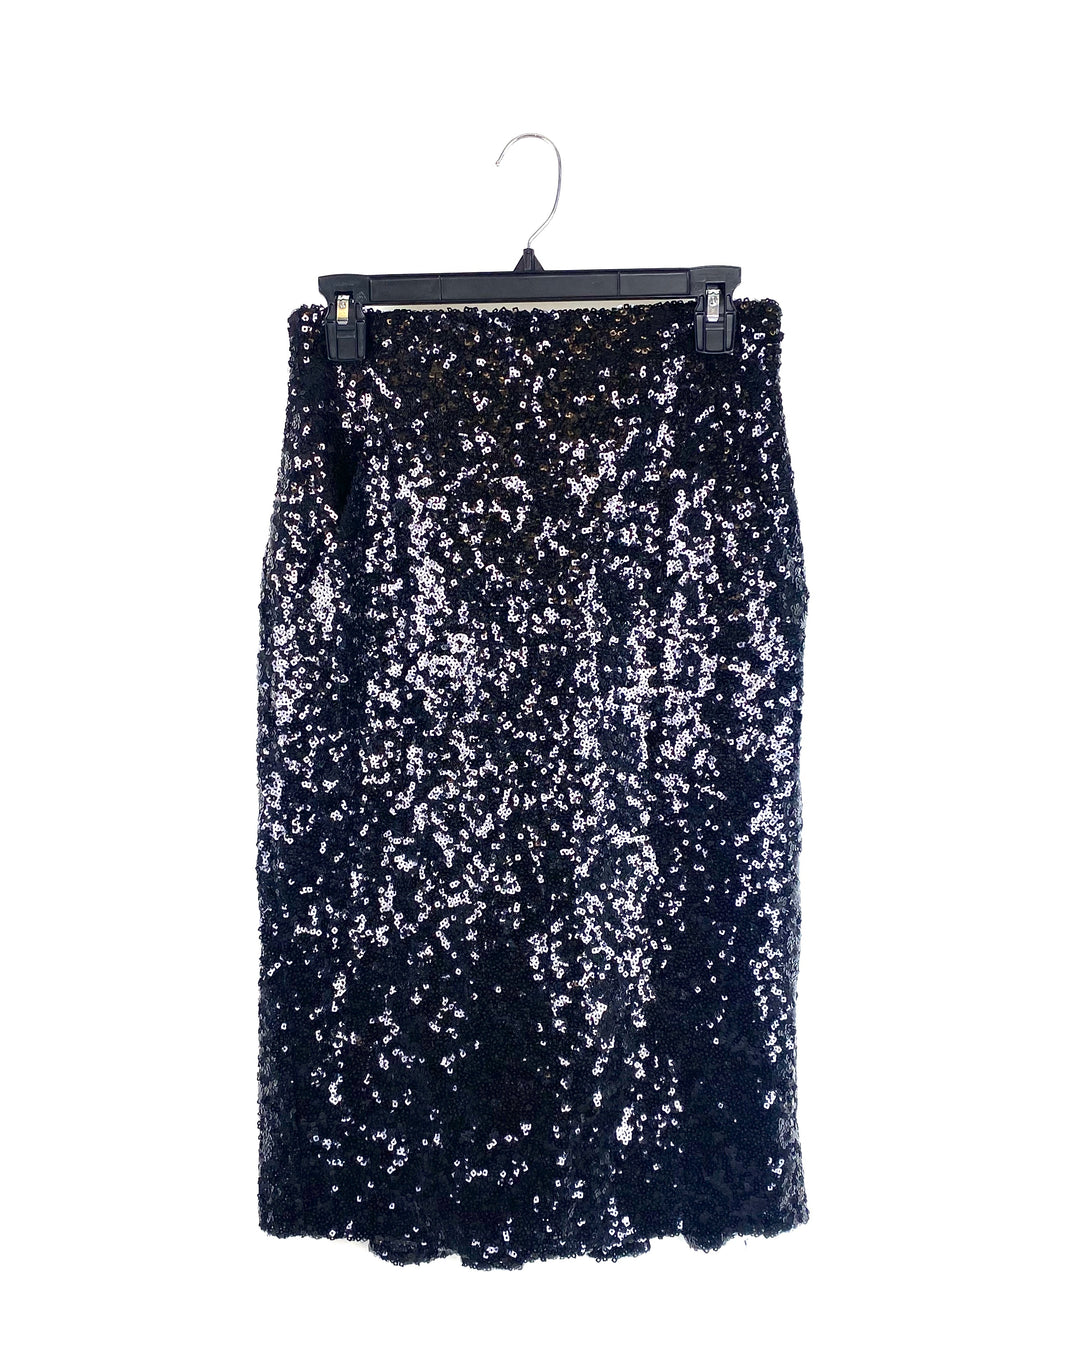 Black Fitted Sequin Skirt - Size 4